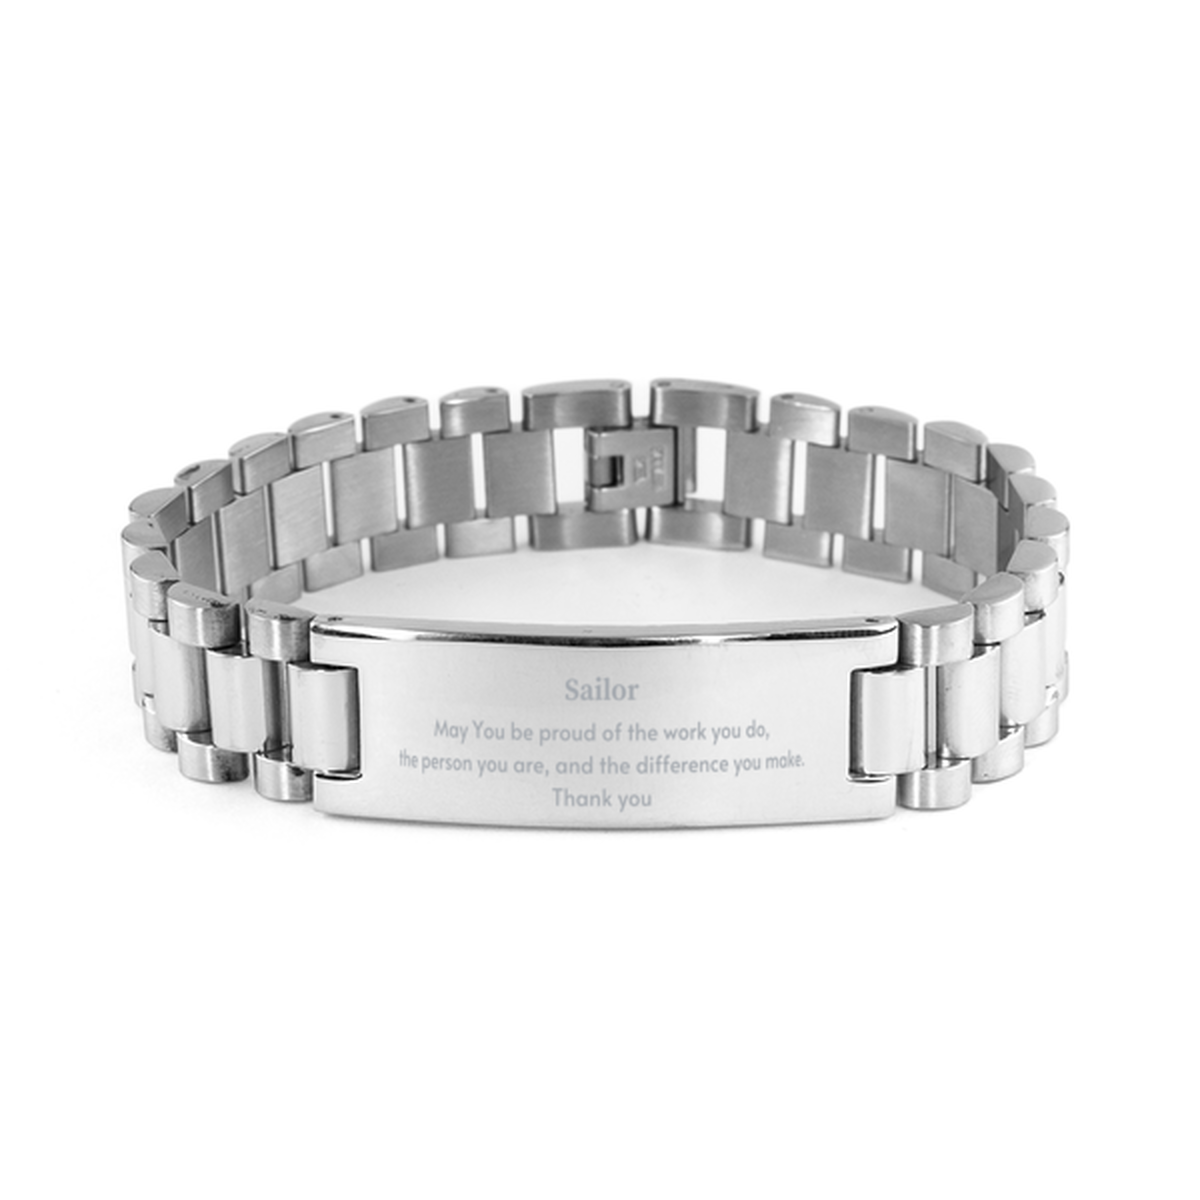 Heartwarming Ladder Stainless Steel Bracelet Retirement Coworkers Gifts for Sailor, Sailor May You be proud of the work you do, the person you are Gifts for Boss Men Women Friends